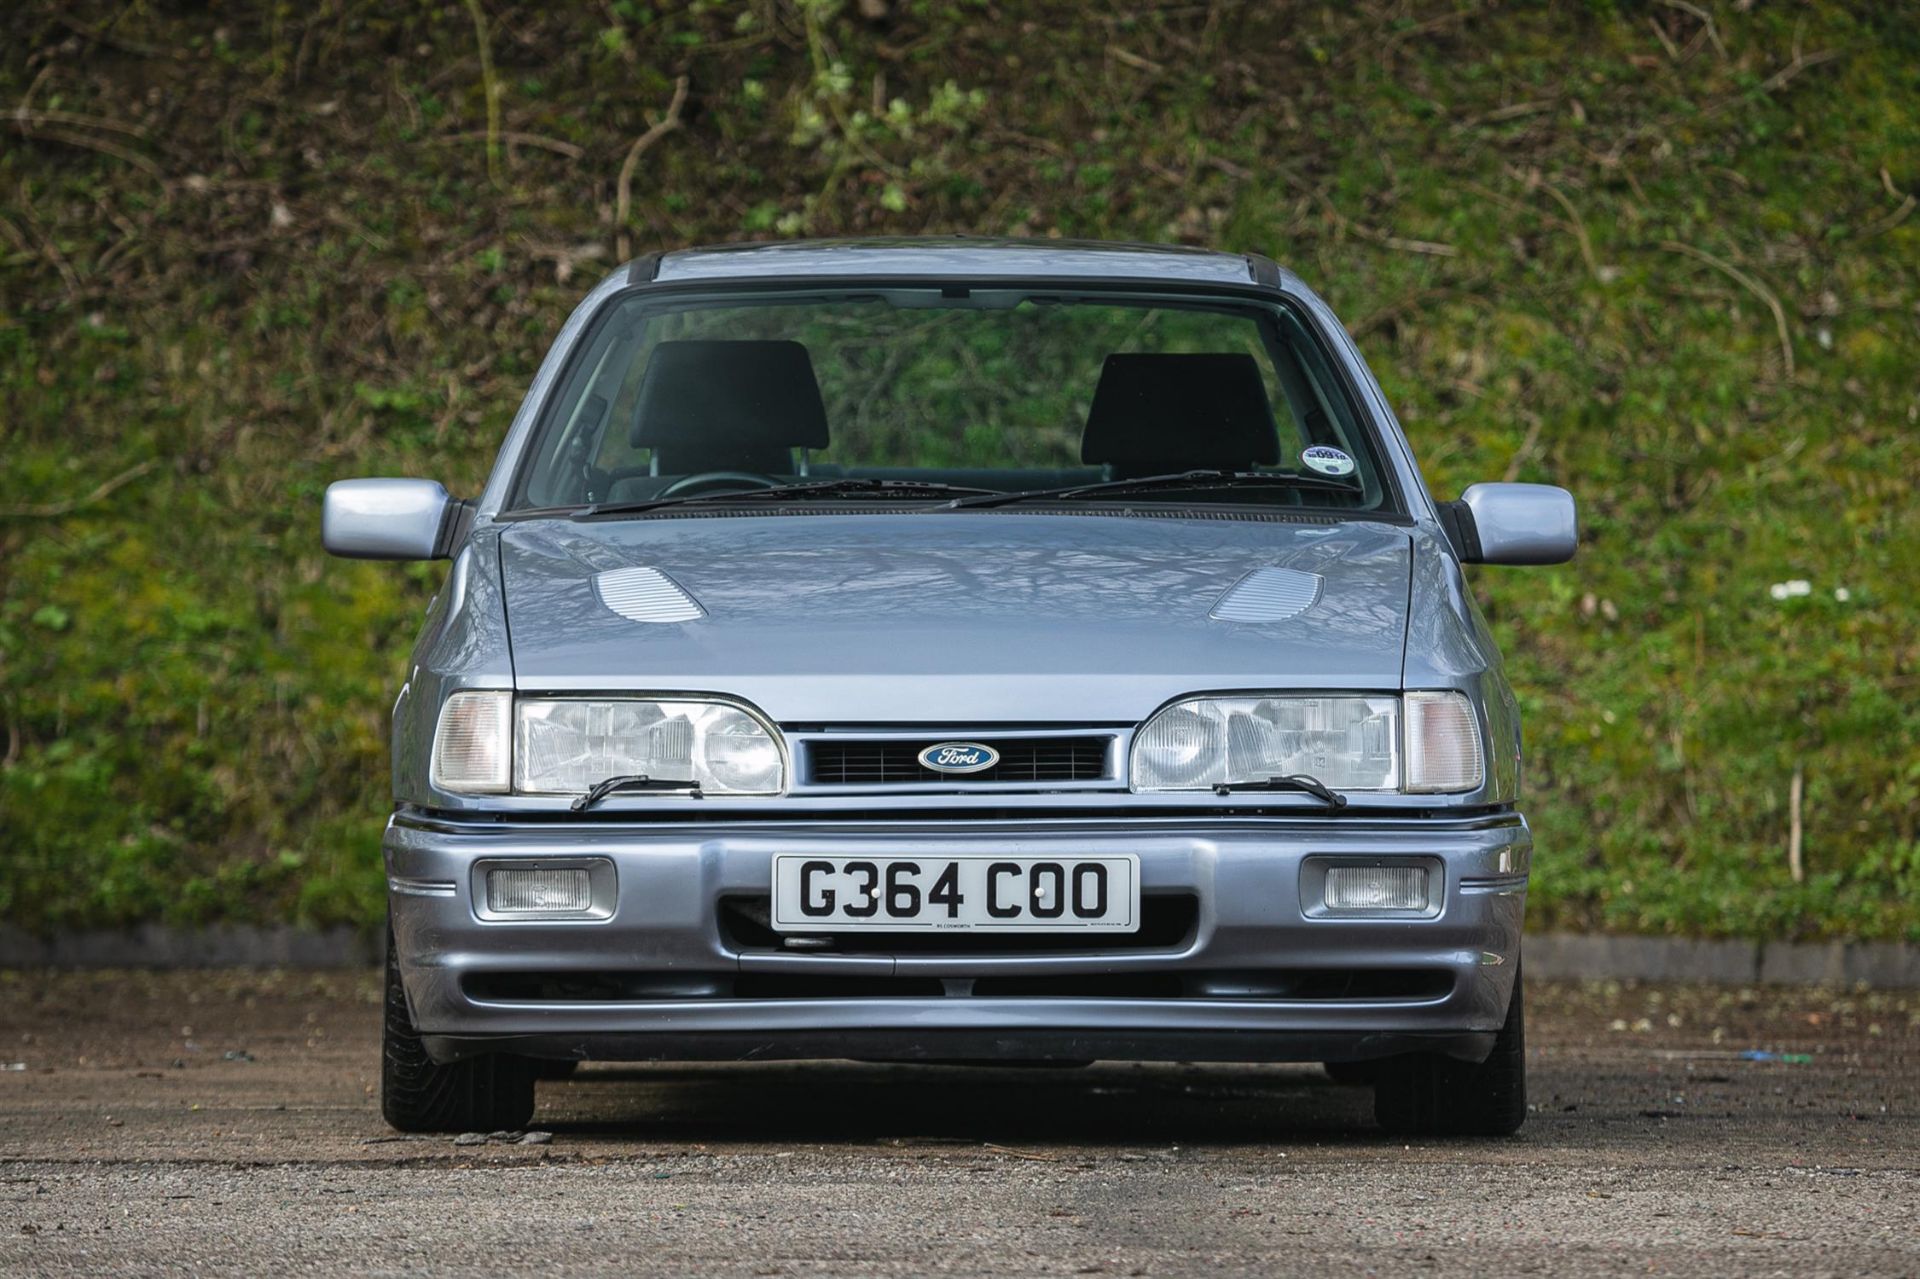 1990 Ford Sierra Sapphire RS Cosworth 4x4 - ex-Press Car - Image 6 of 10